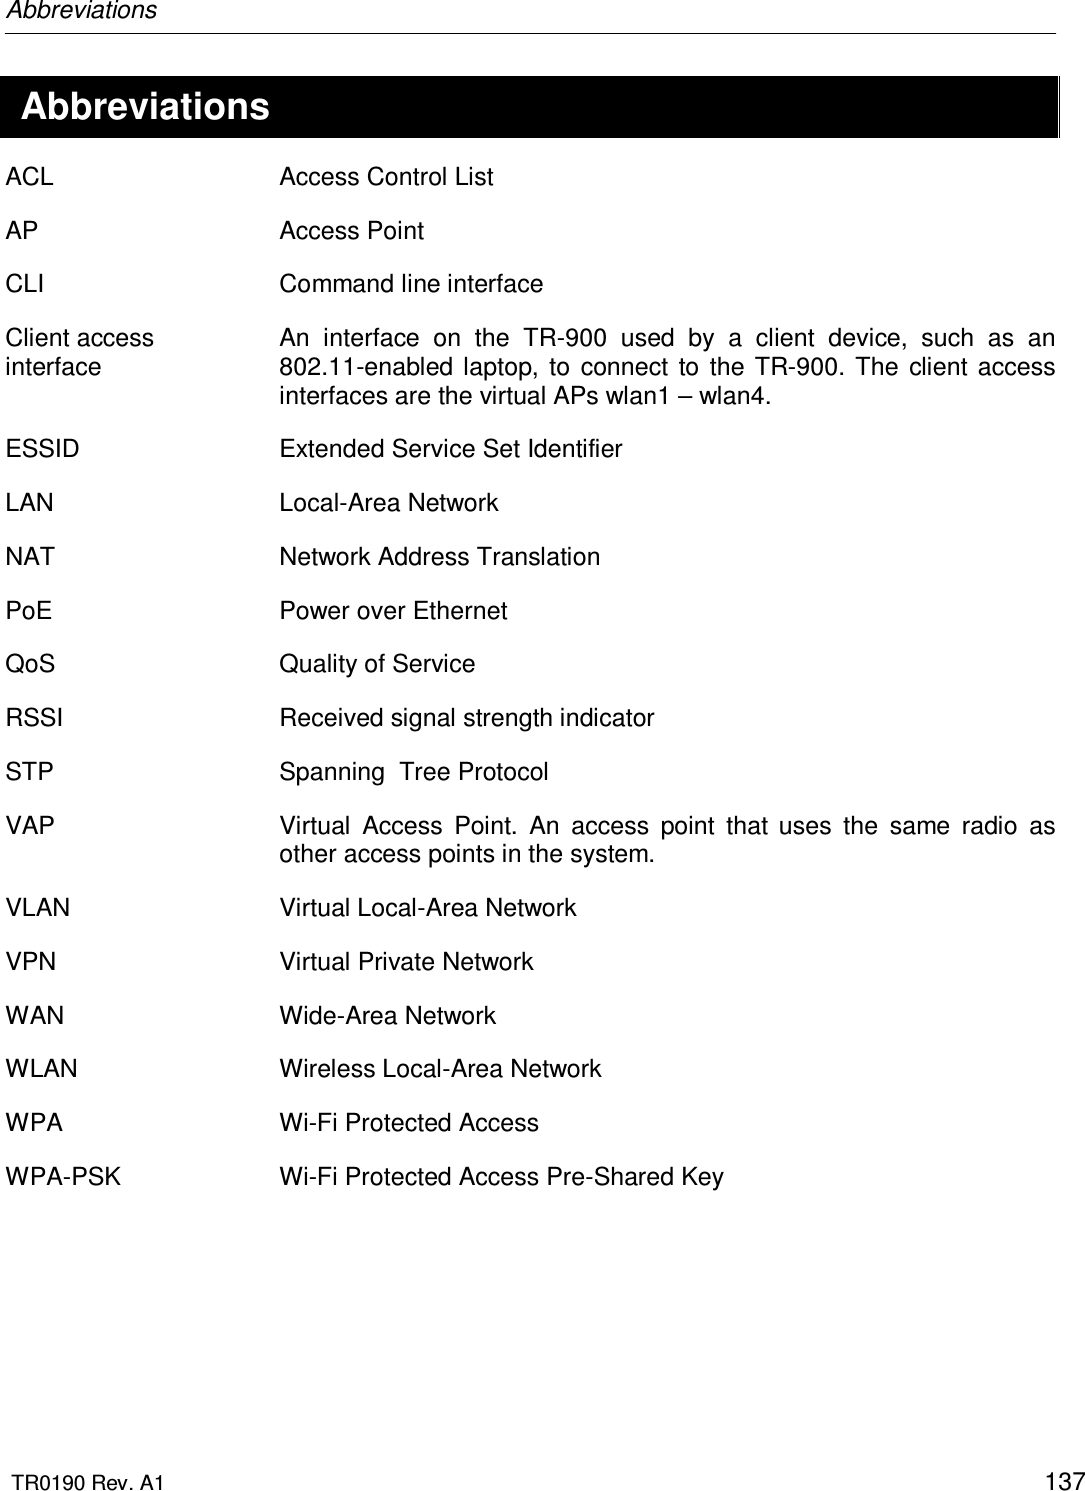 Abbreviations  TR0190 Rev. A1    137  Abbreviations ACL  Access Control List AP  Access Point CLI  Command line interface Client access interface An  interface  on  the  TR-900  used  by  a  client  device,  such  as  an 802.11-enabled  laptop,  to  connect  to  the TR-900. The  client  access interfaces are the virtual APs wlan1 – wlan4. ESSID  Extended Service Set Identifier LAN  Local-Area Network NAT  Network Address Translation PoE  Power over Ethernet QoS  Quality of Service RSSI  Received signal strength indicator STP  Spanning  Tree Protocol VAP  Virtual  Access  Point.  An  access  point  that  uses  the  same  radio  as other access points in the system. VLAN  Virtual Local-Area Network VPN  Virtual Private Network WAN  Wide-Area Network WLAN  Wireless Local-Area Network WPA  Wi-Fi Protected Access WPA-PSK  Wi-Fi Protected Access Pre-Shared Key   